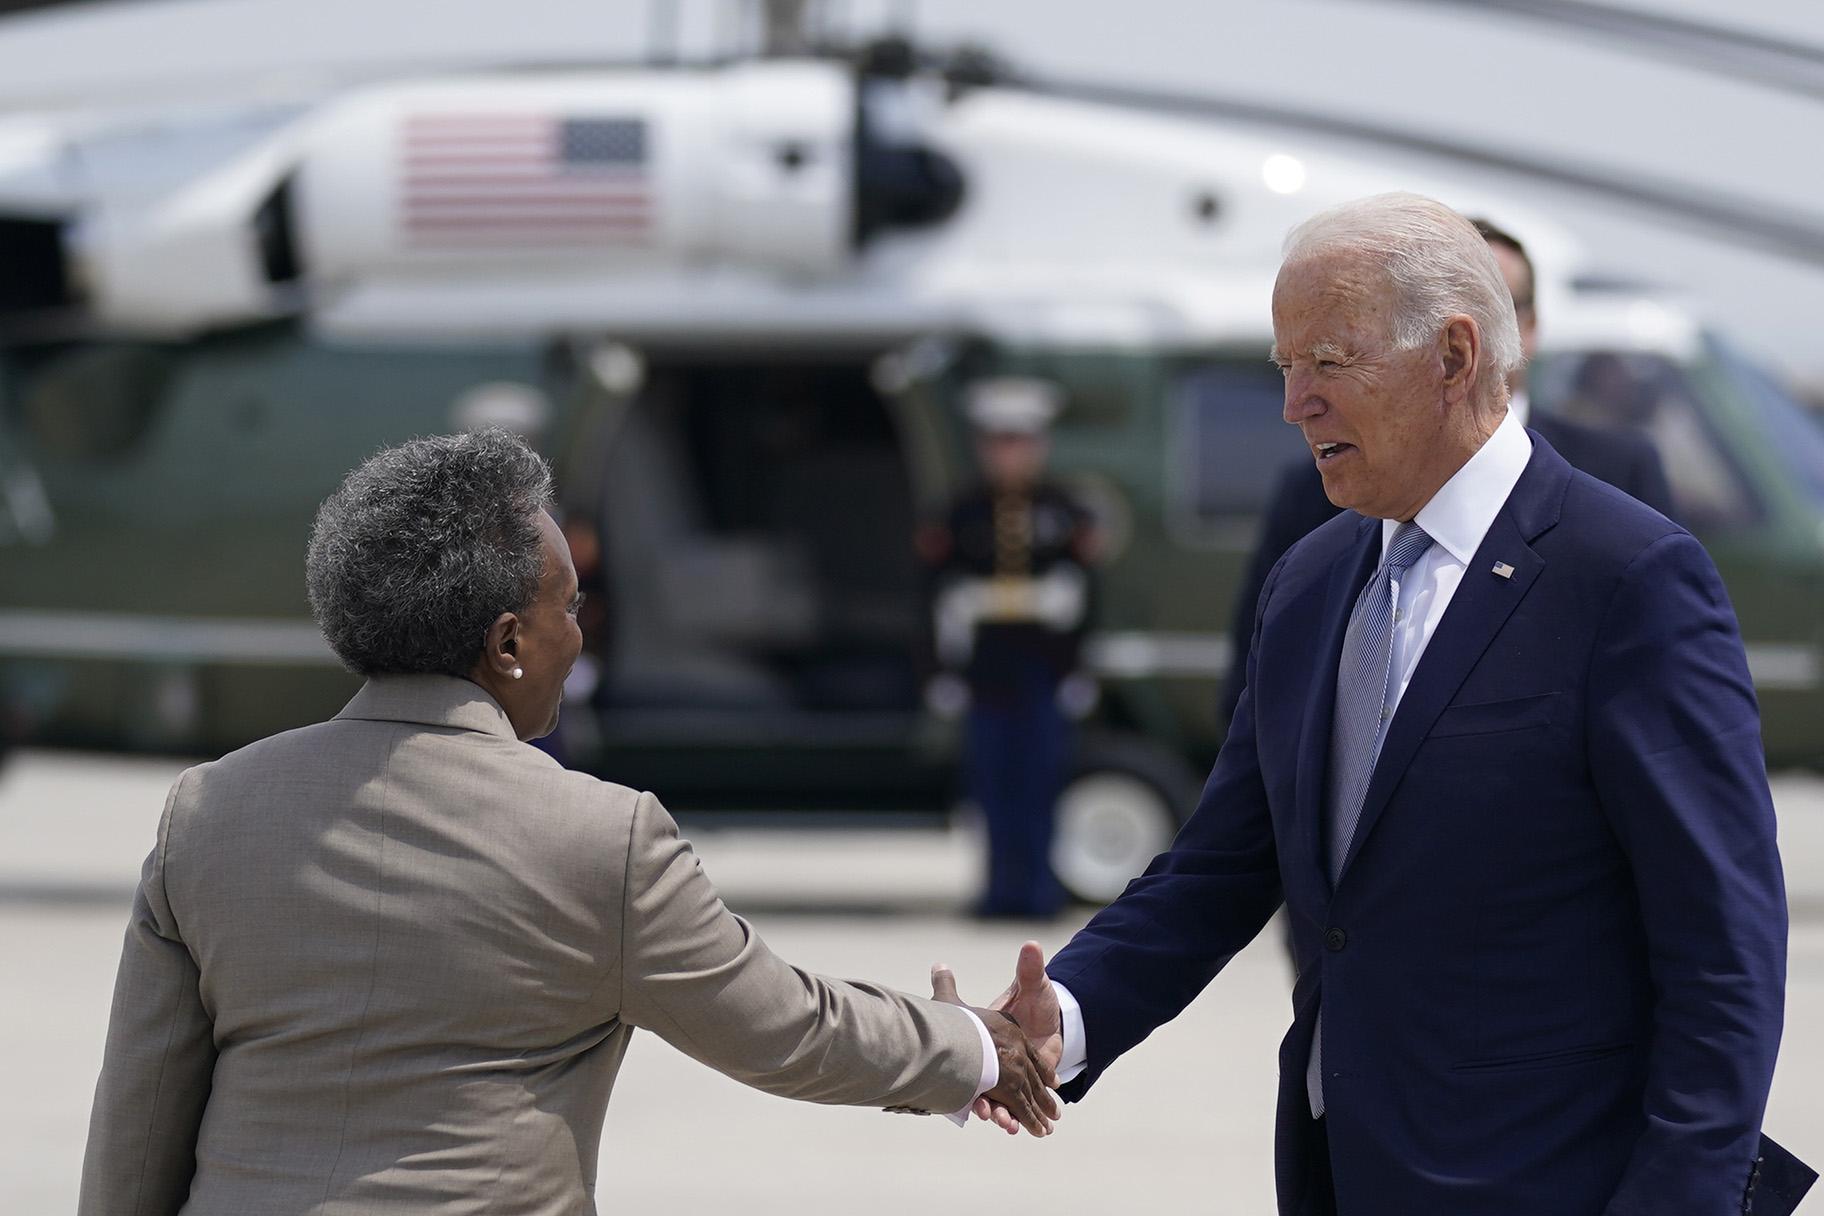 President Joe Biden greets Chicago Mayor Lori Lightfoot as he arrives at O’Hare International Airport, Wednesday, July 7, 2021, in Chicago. (AP Photo / Evan Vucci)